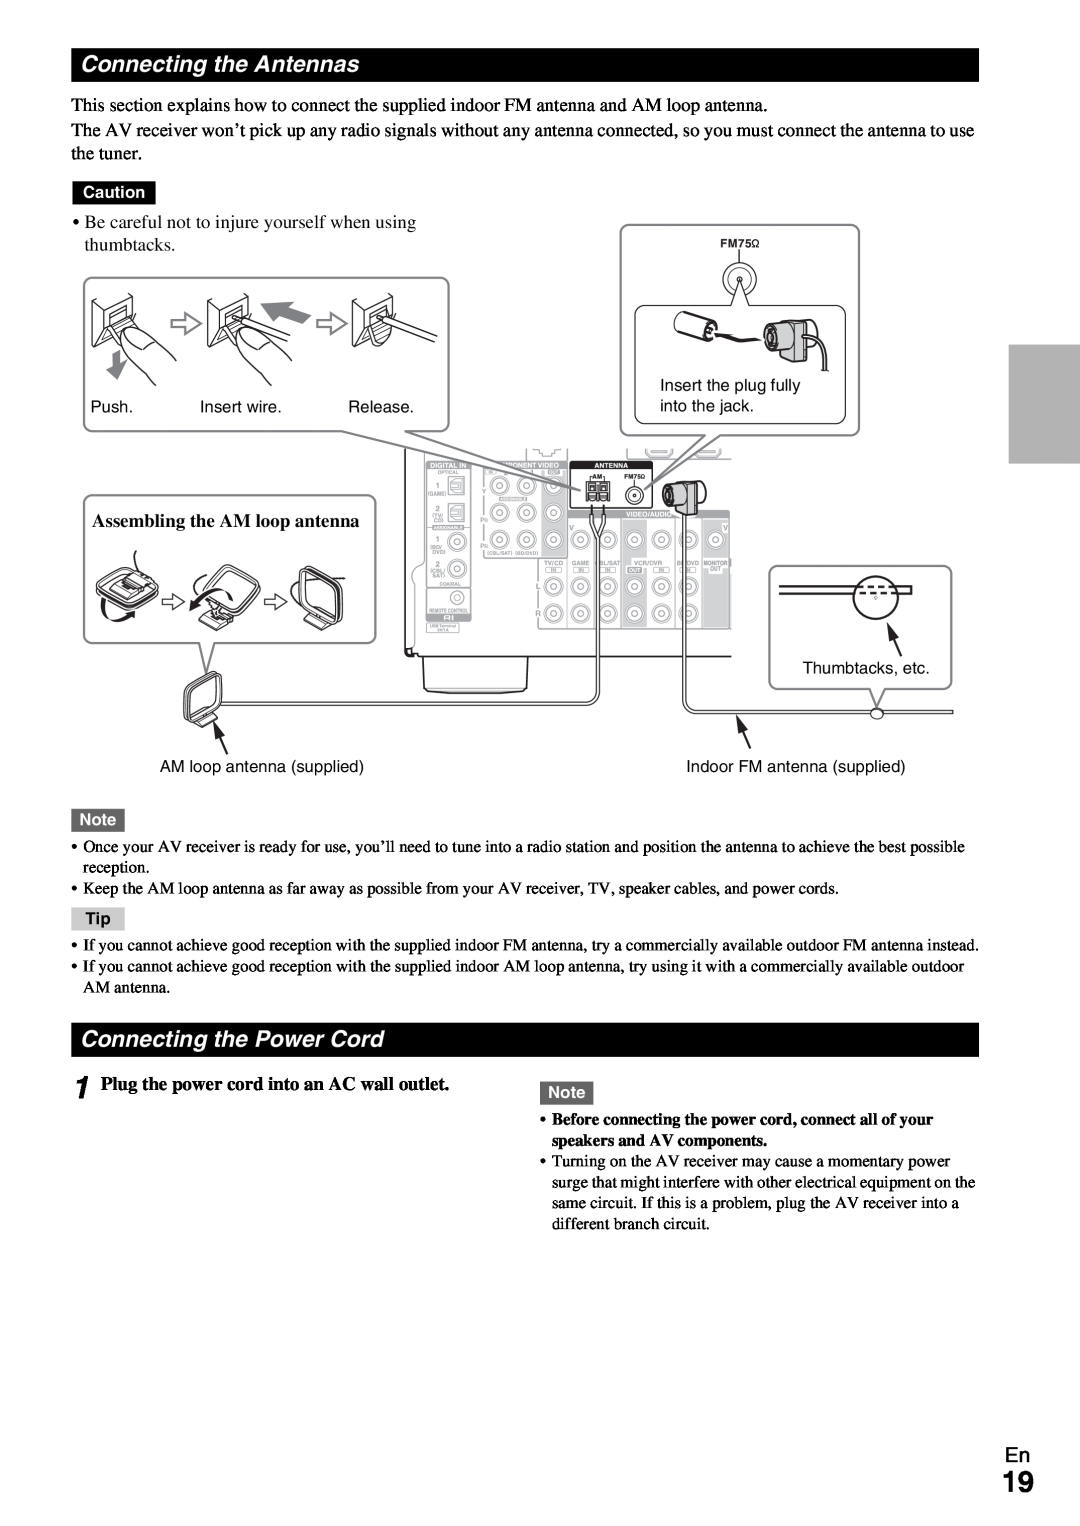 Onkyo TX-NR579 instruction manual Connecting the Antennas, Connecting the Power Cord, Assembling the AM loop antenna 